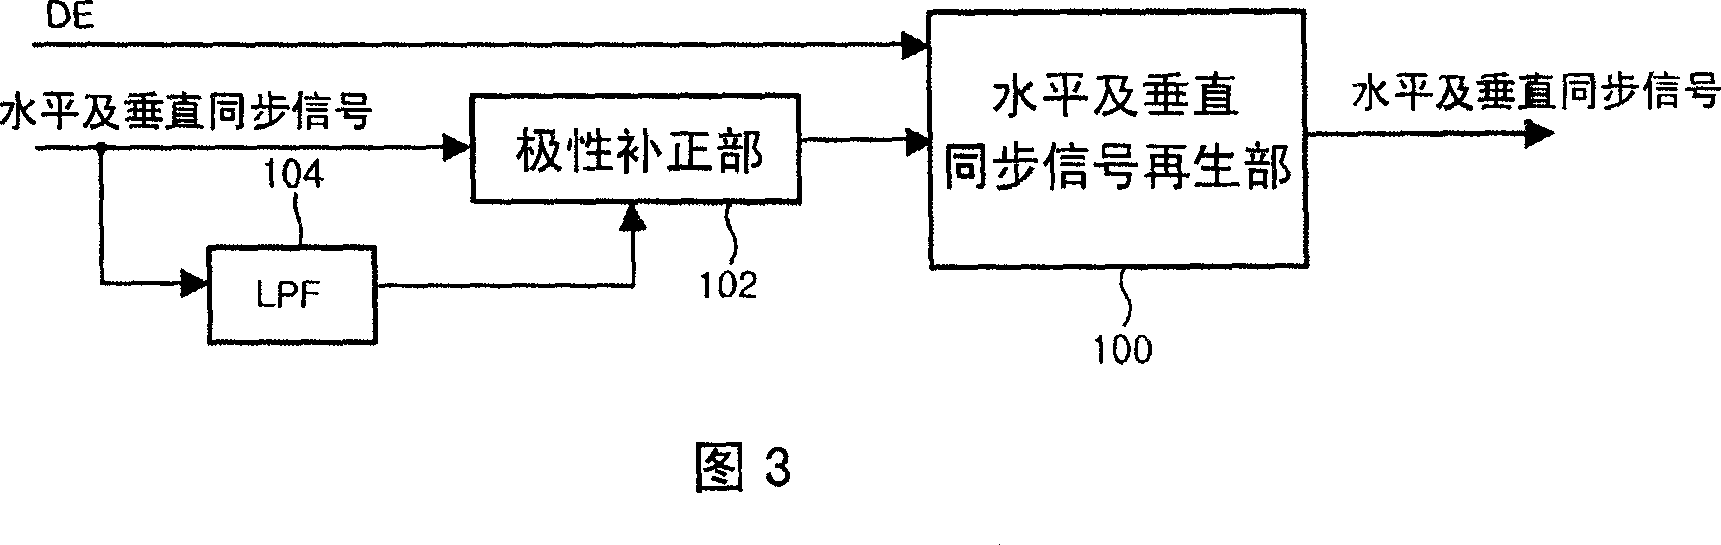 Allowable data signal processing device for interactive digital video system interface